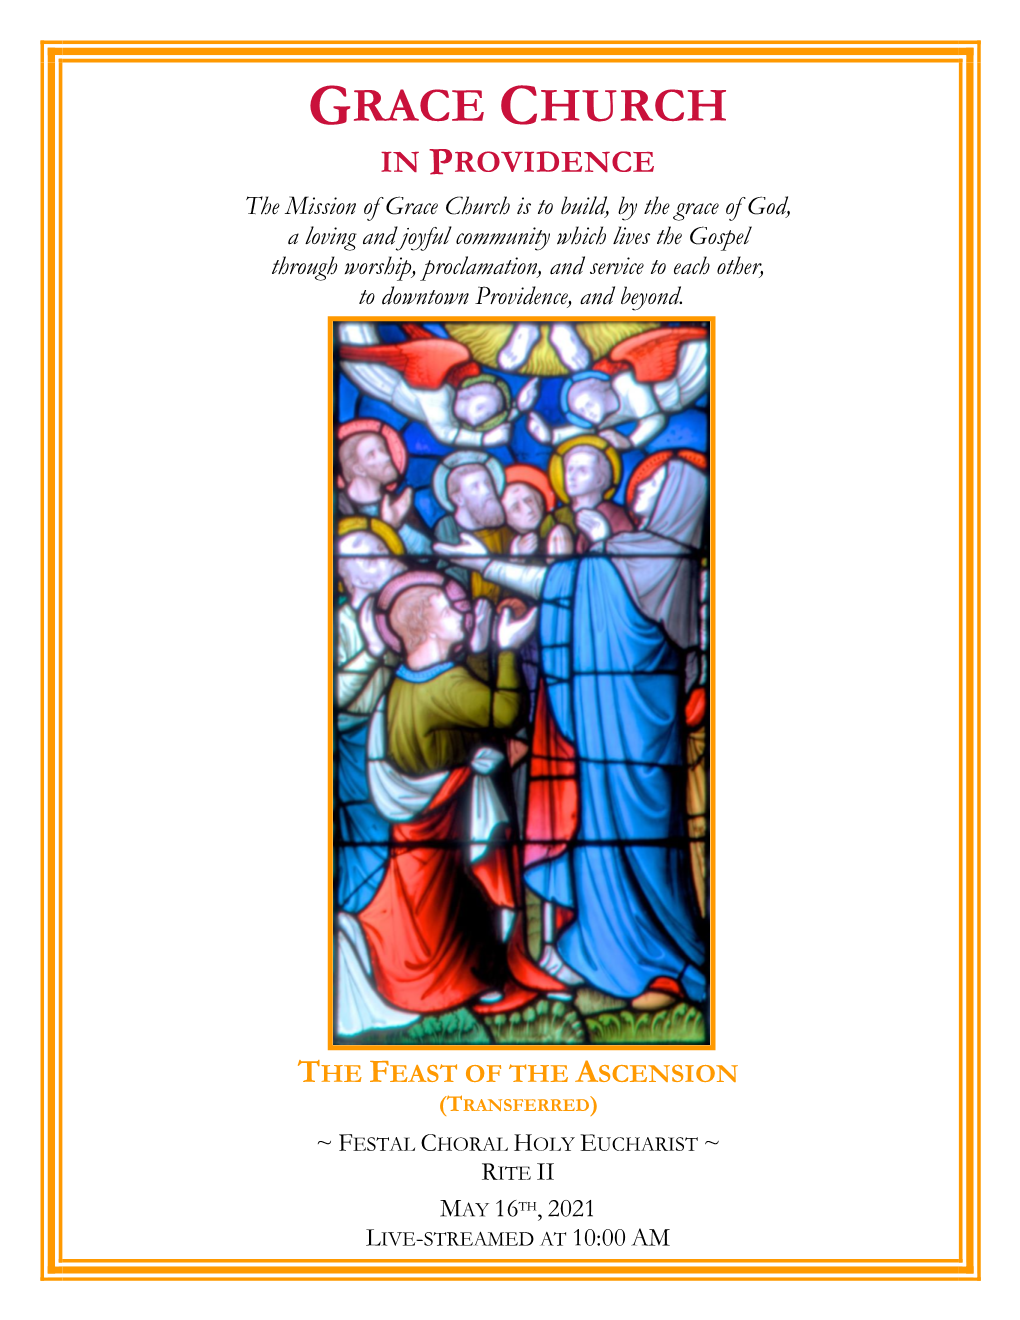 The Order of Service for the Feast of the Ascension (Transferred)